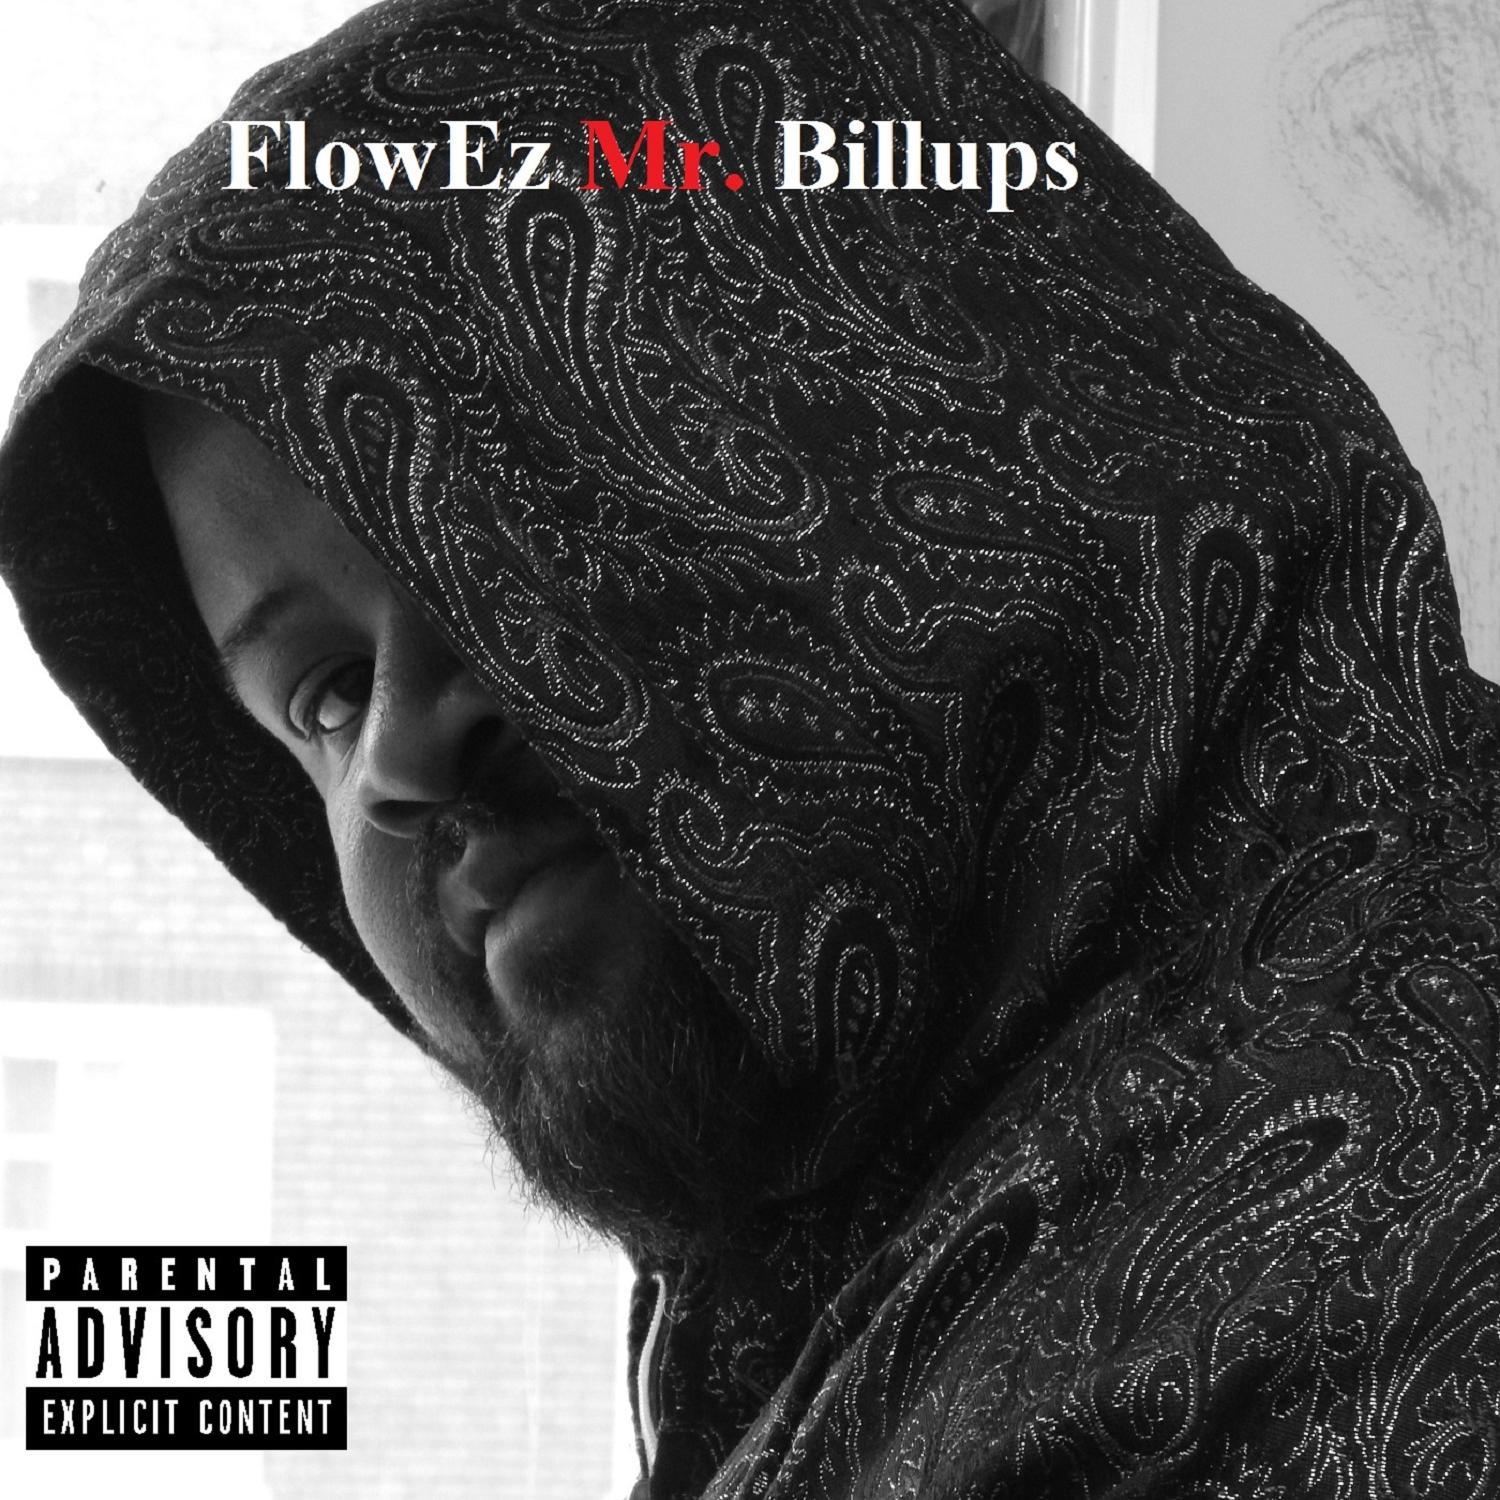 FlowEz Mr. Billups is a recording artist at DefBoyProductions LLC for Bookings and features contact flowez502@gmail.com